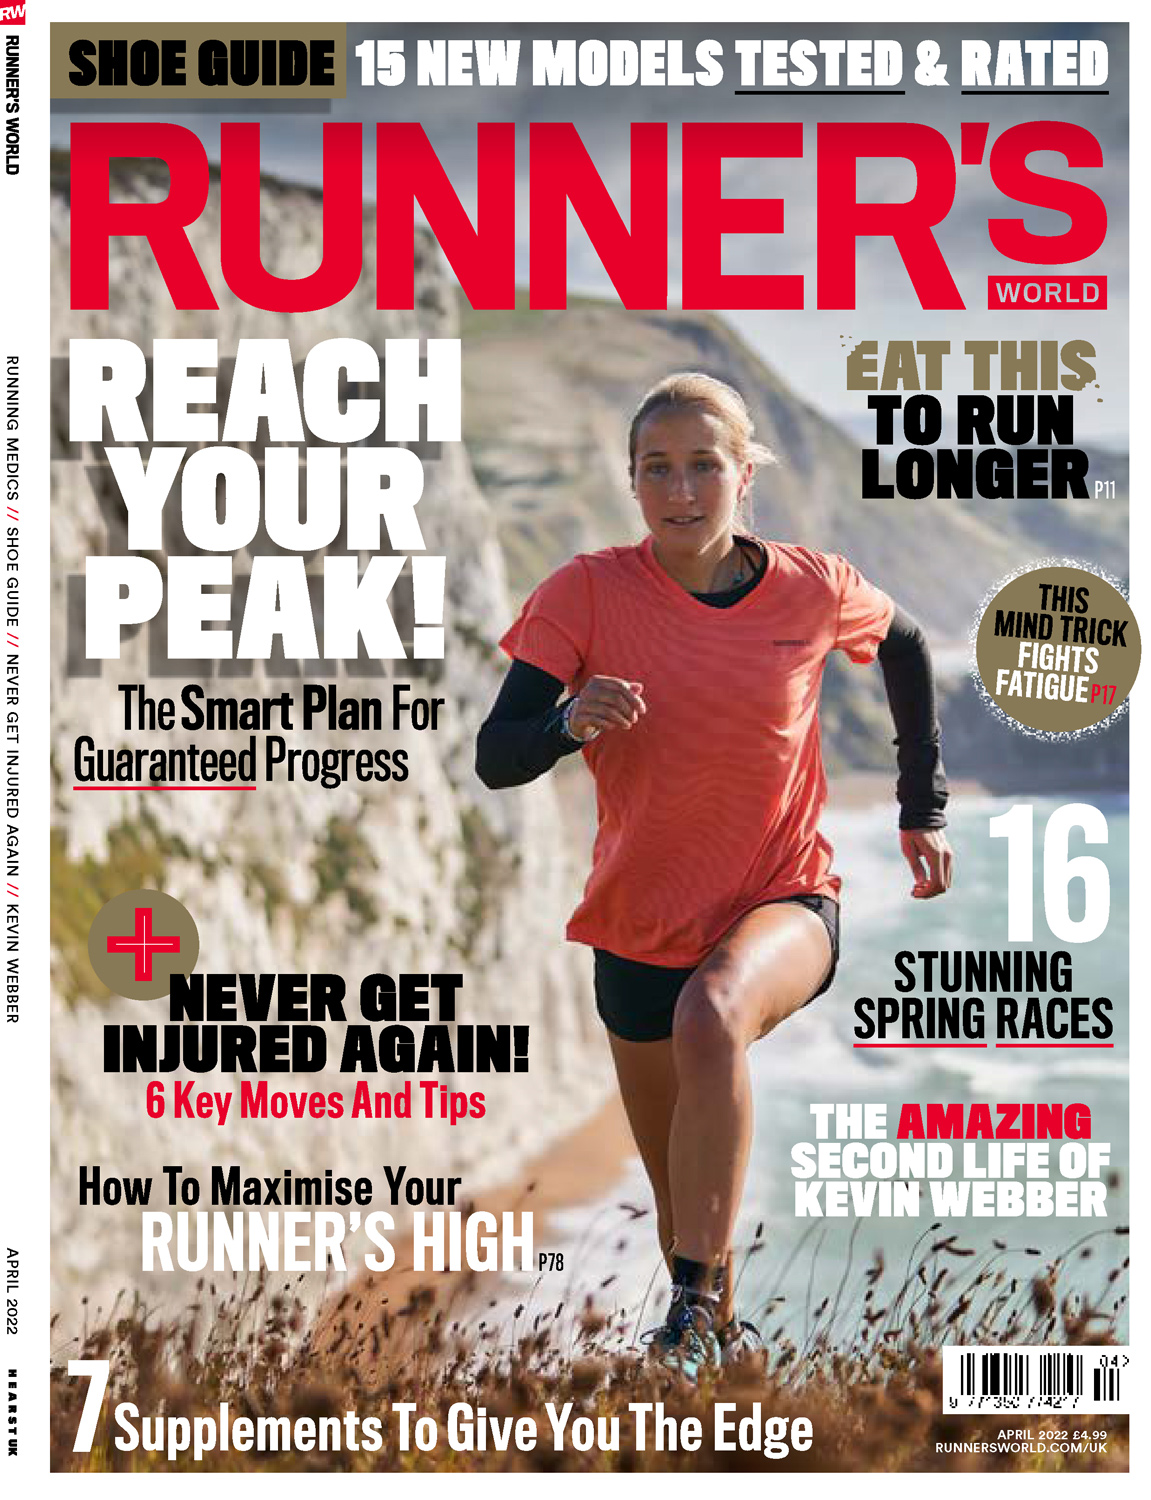 Runners World Magazine April 2022 Cover Photoshoot with Merrell